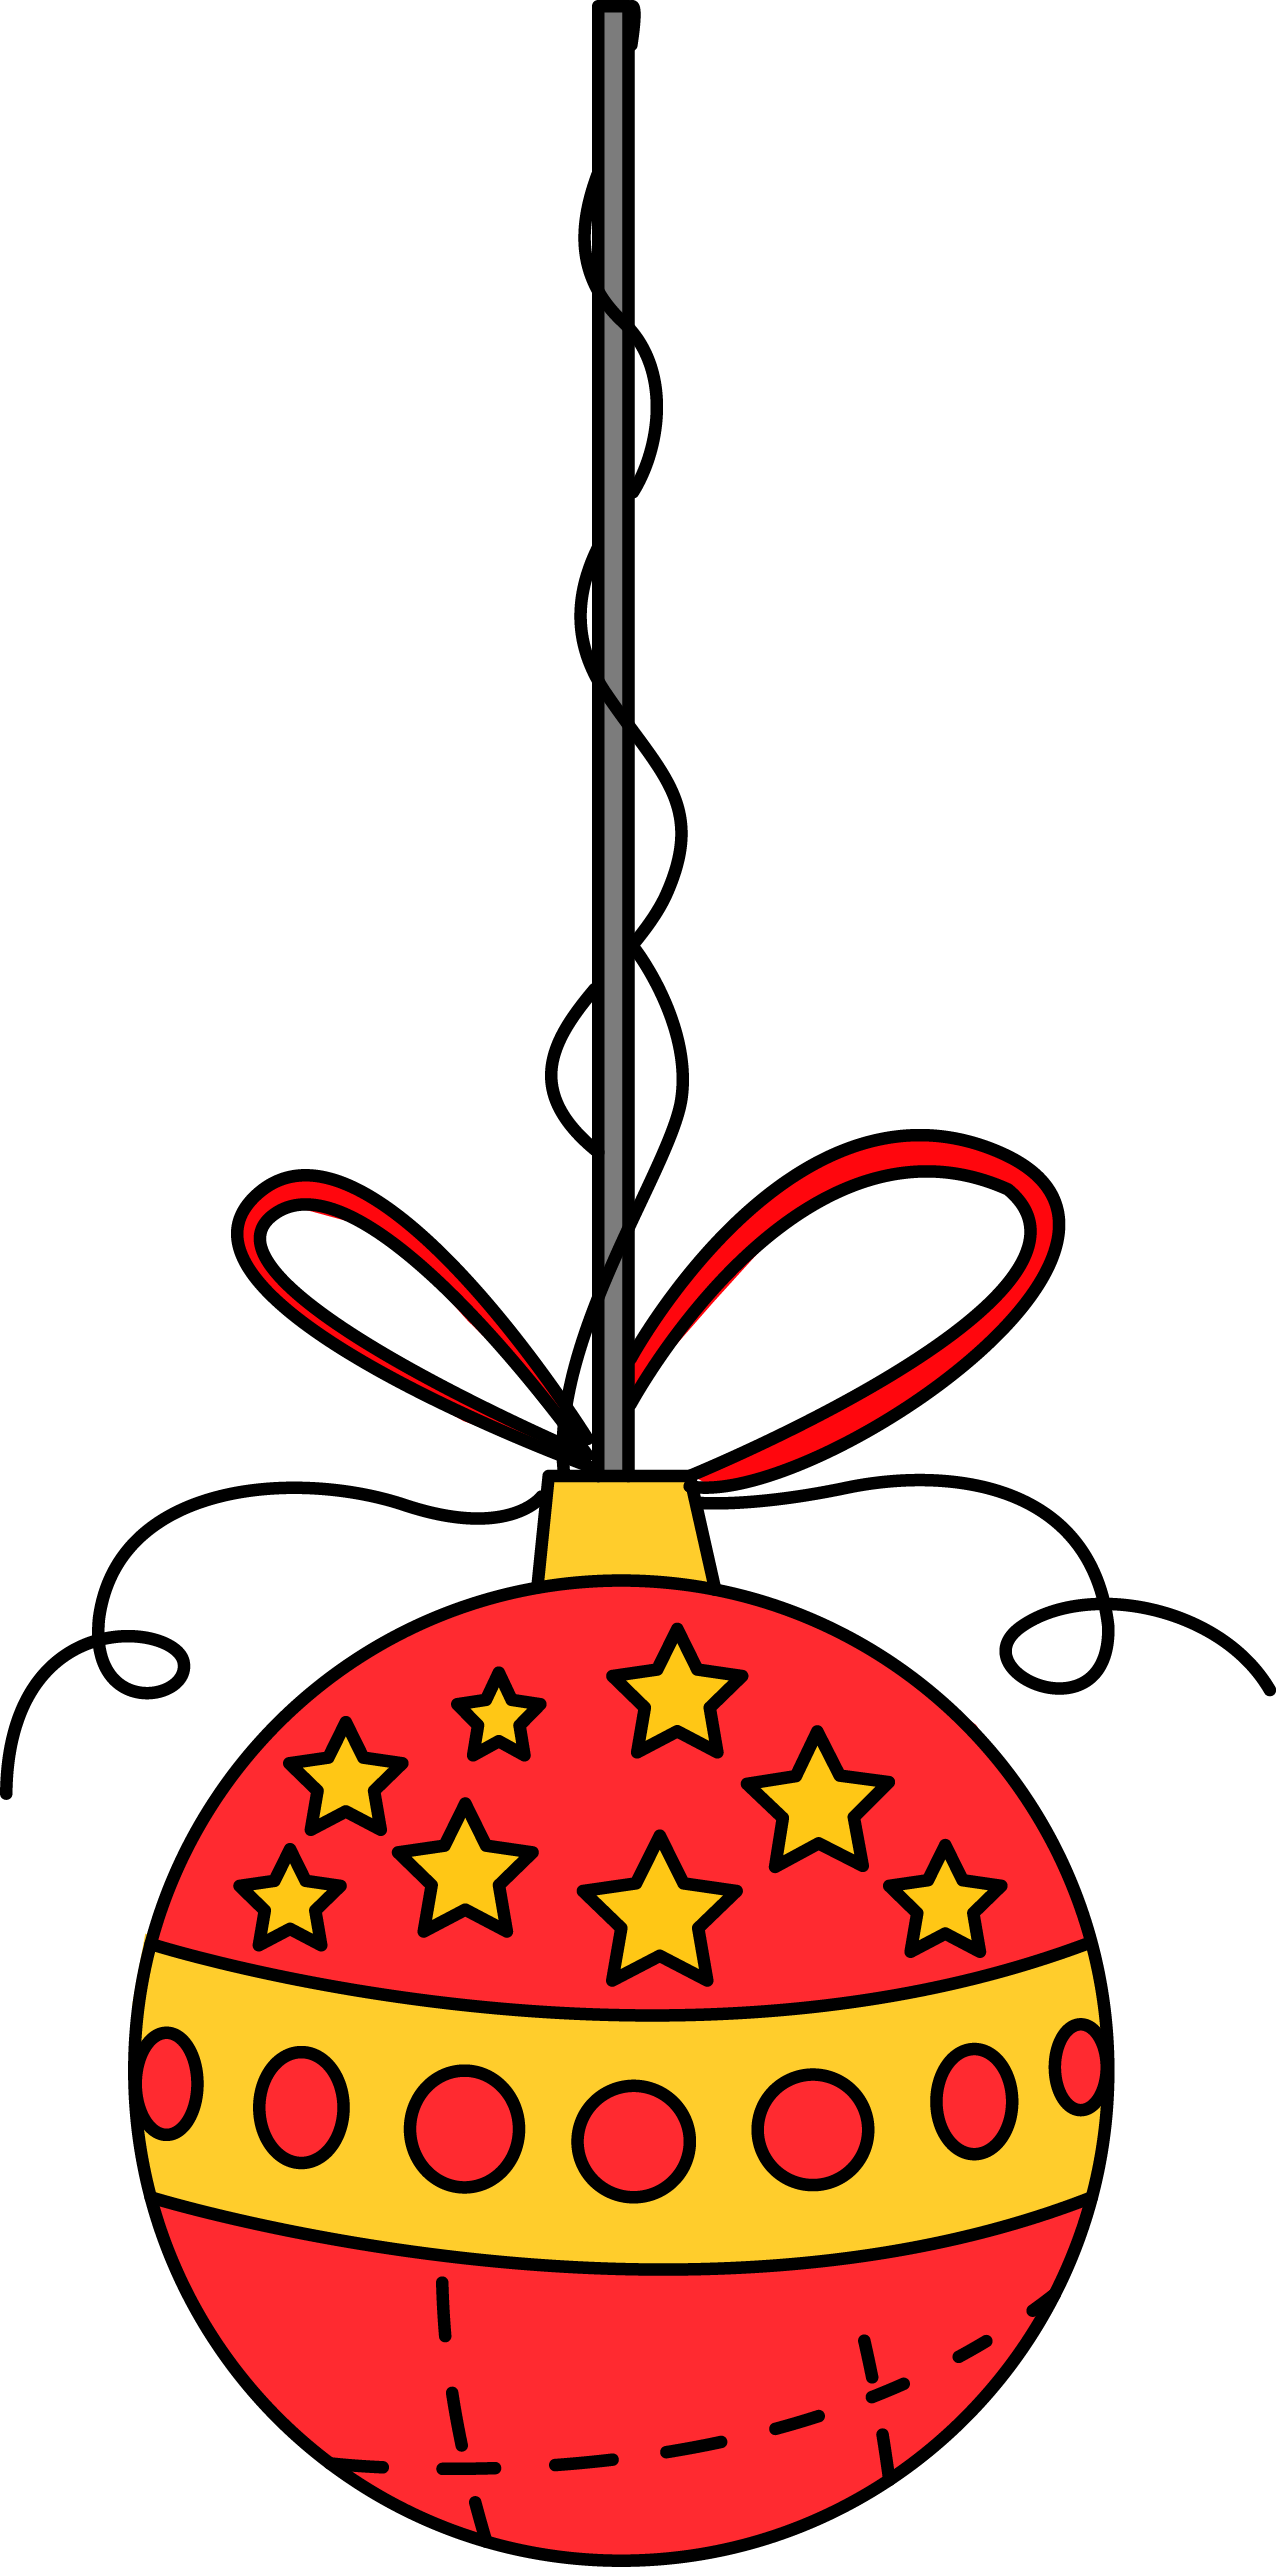 Christmas Free Content Party Clip Art - Christmas Free Content Party Clip Art (1276x2567)